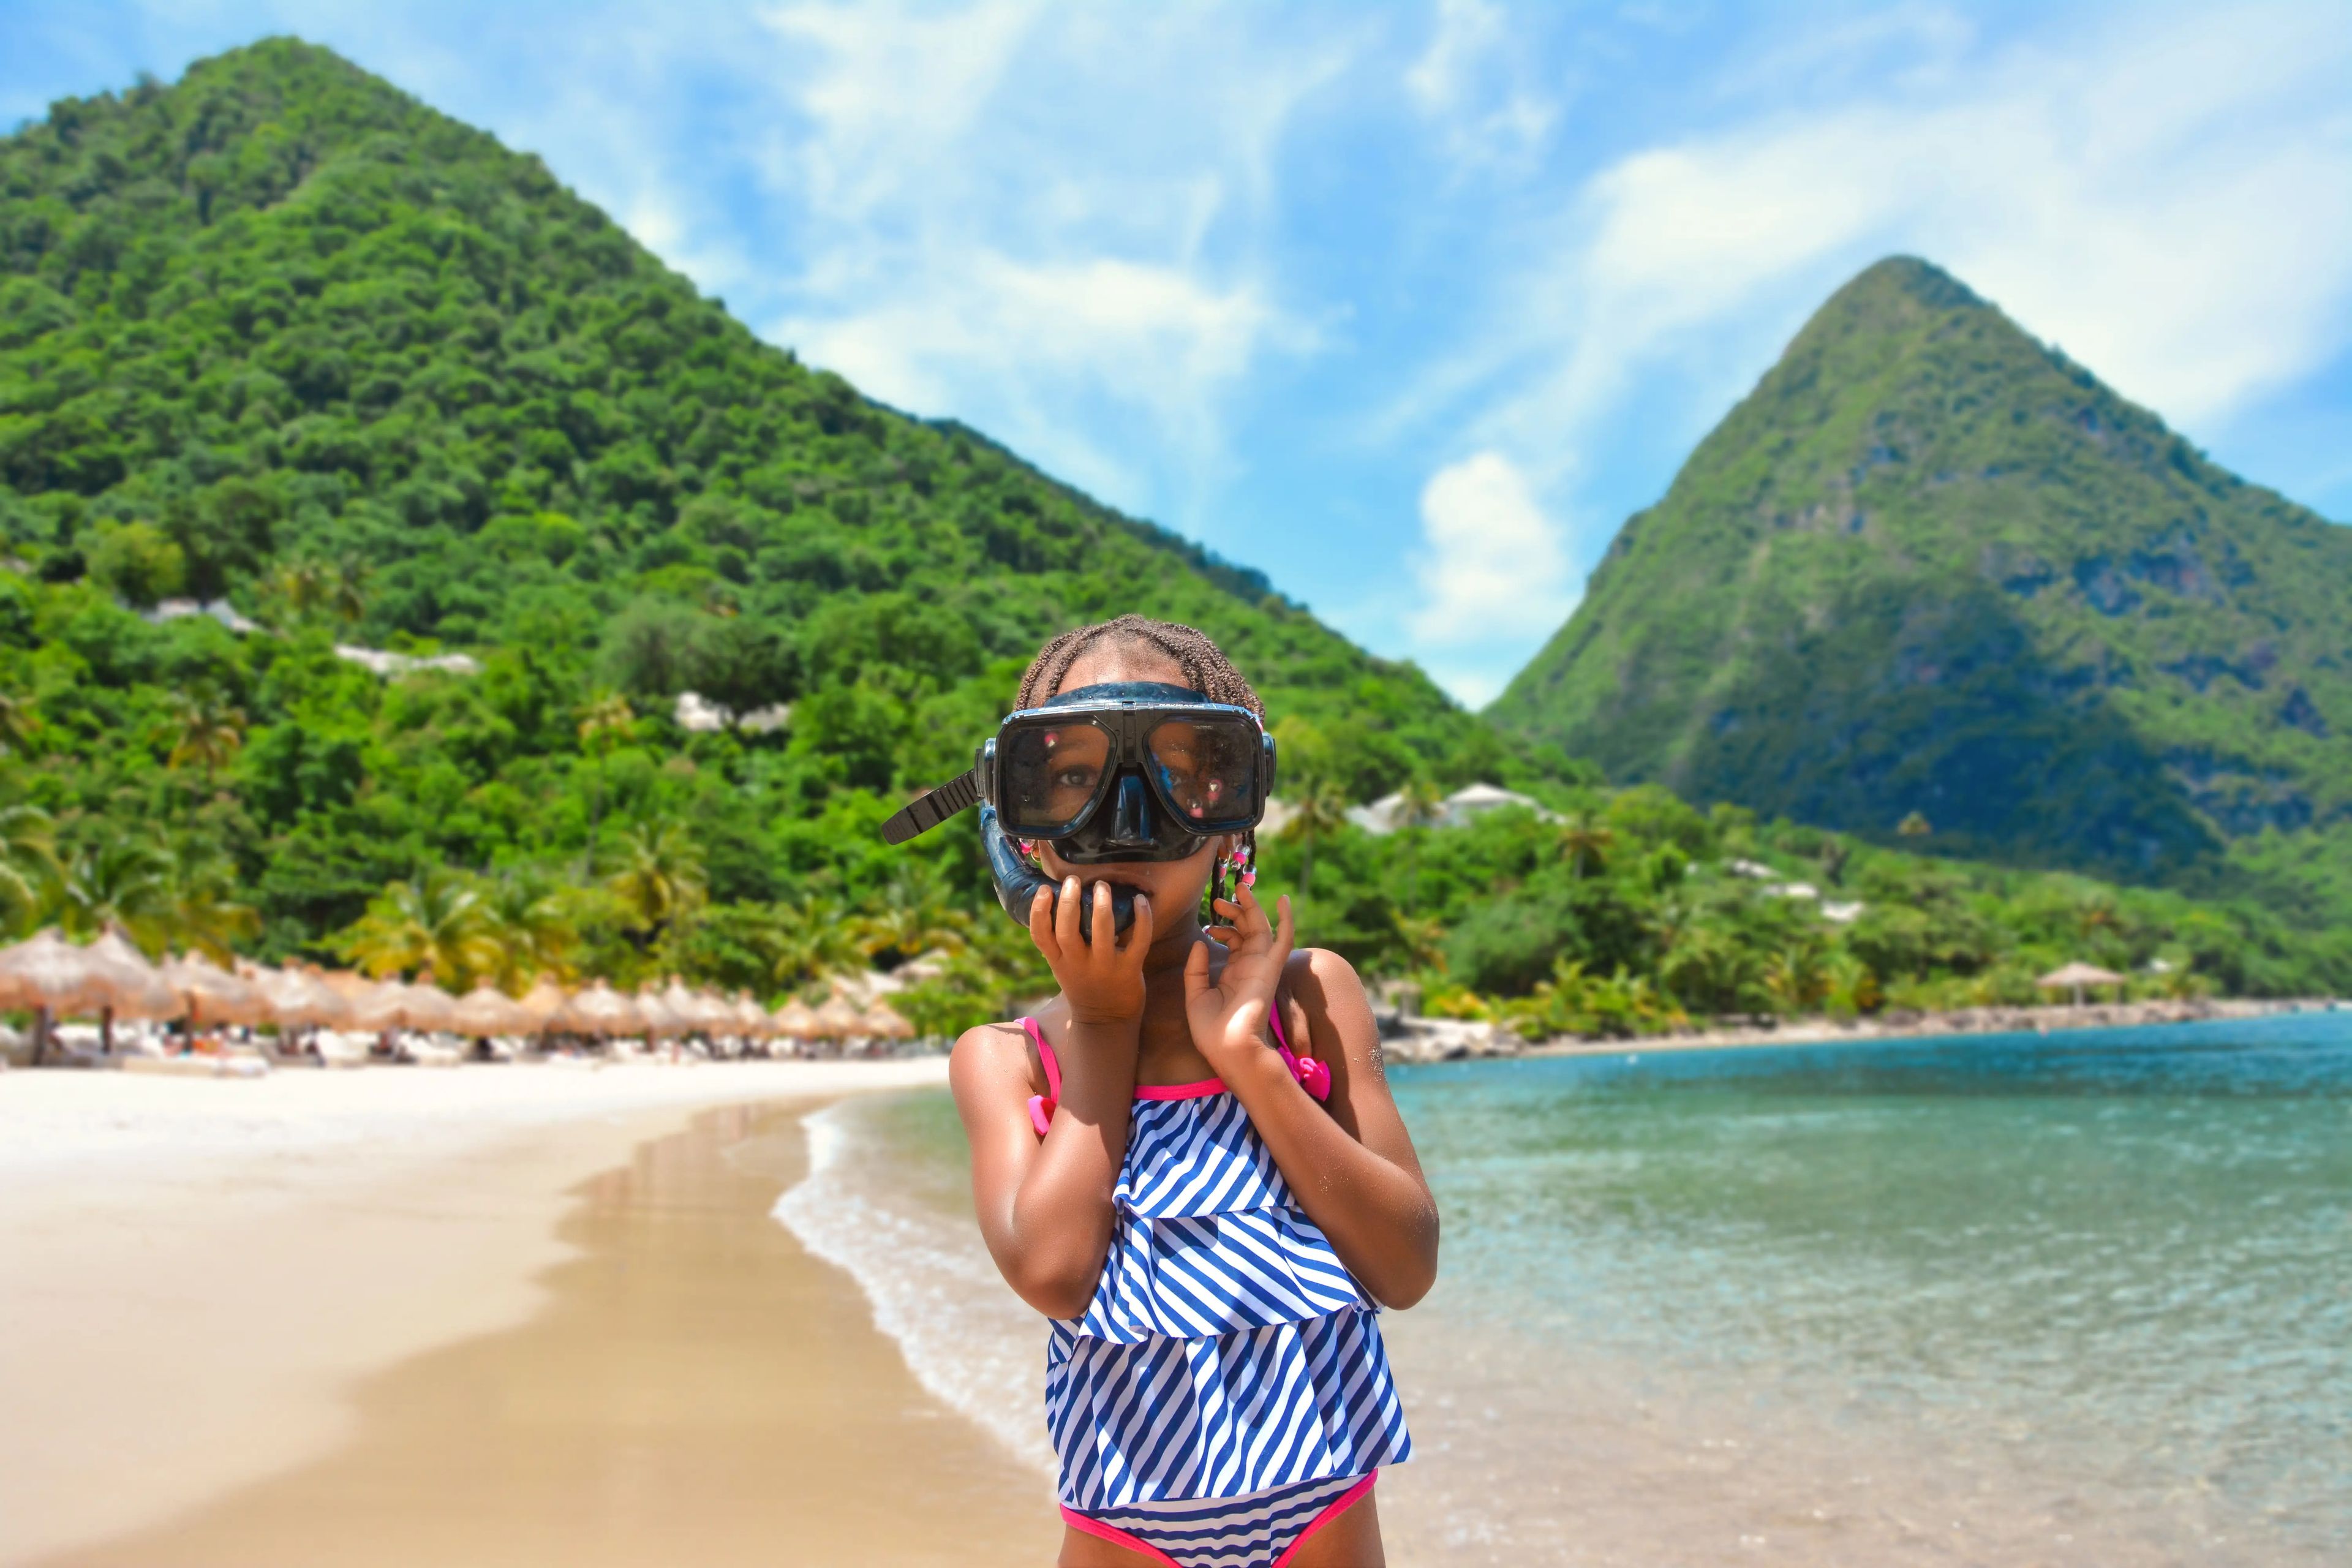 Taryn White's daughter snorkeling at Sugar Beach in St. Lucia.